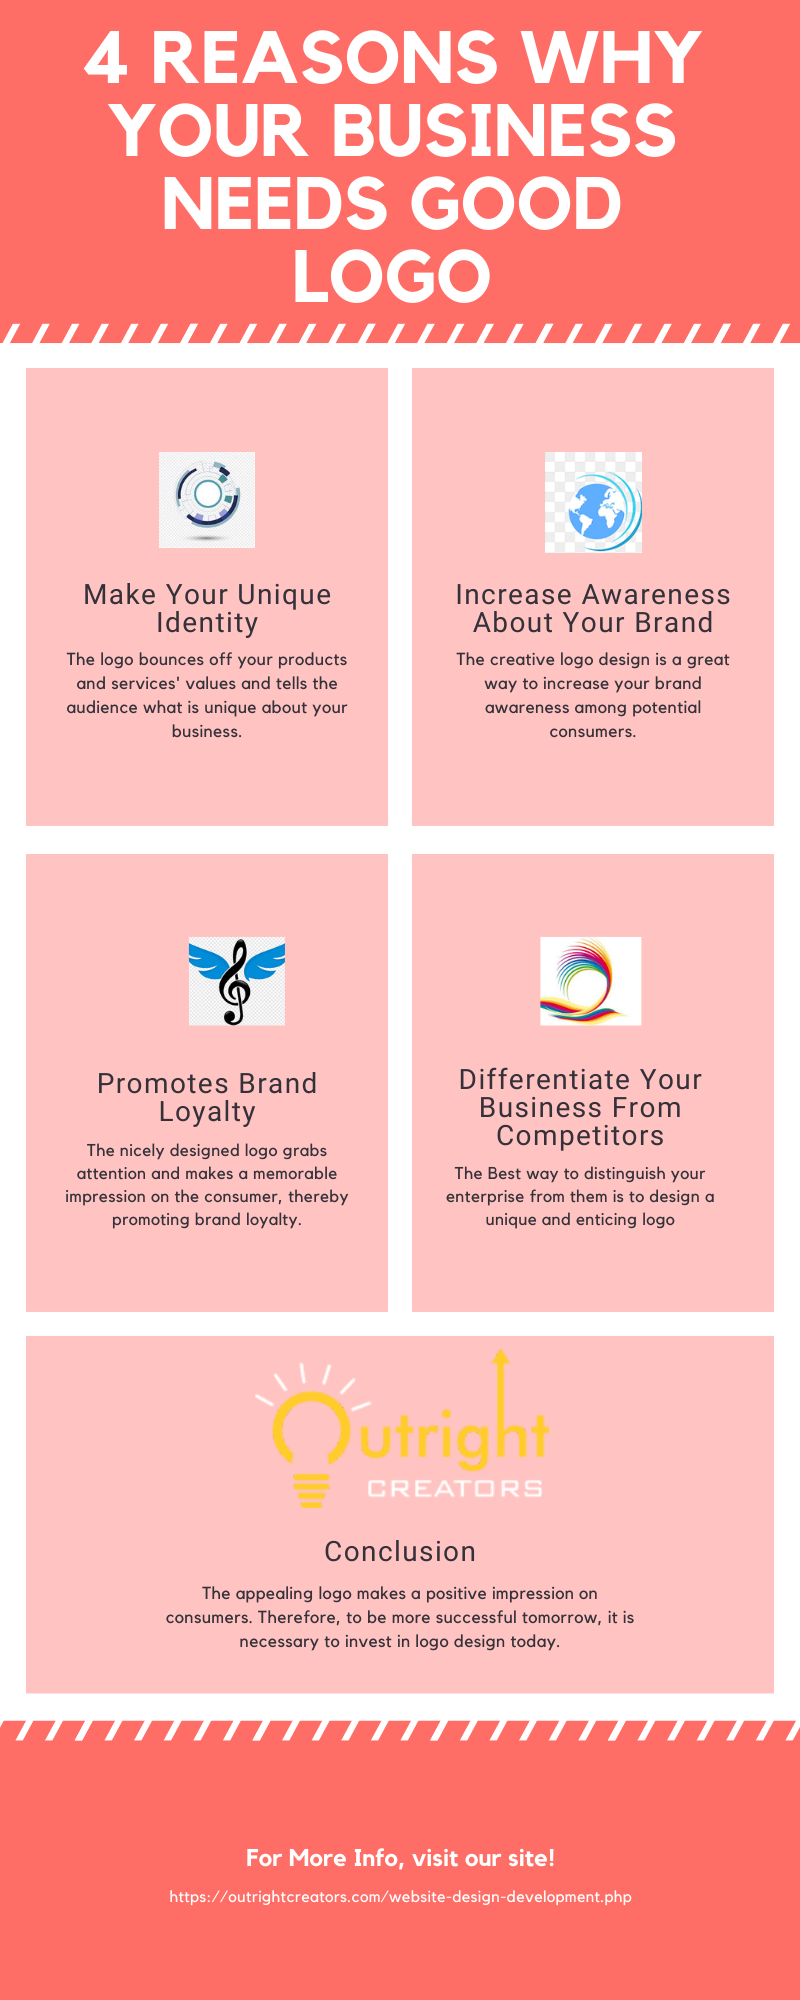 4 Reasons Why Your Business Needs Good Logo